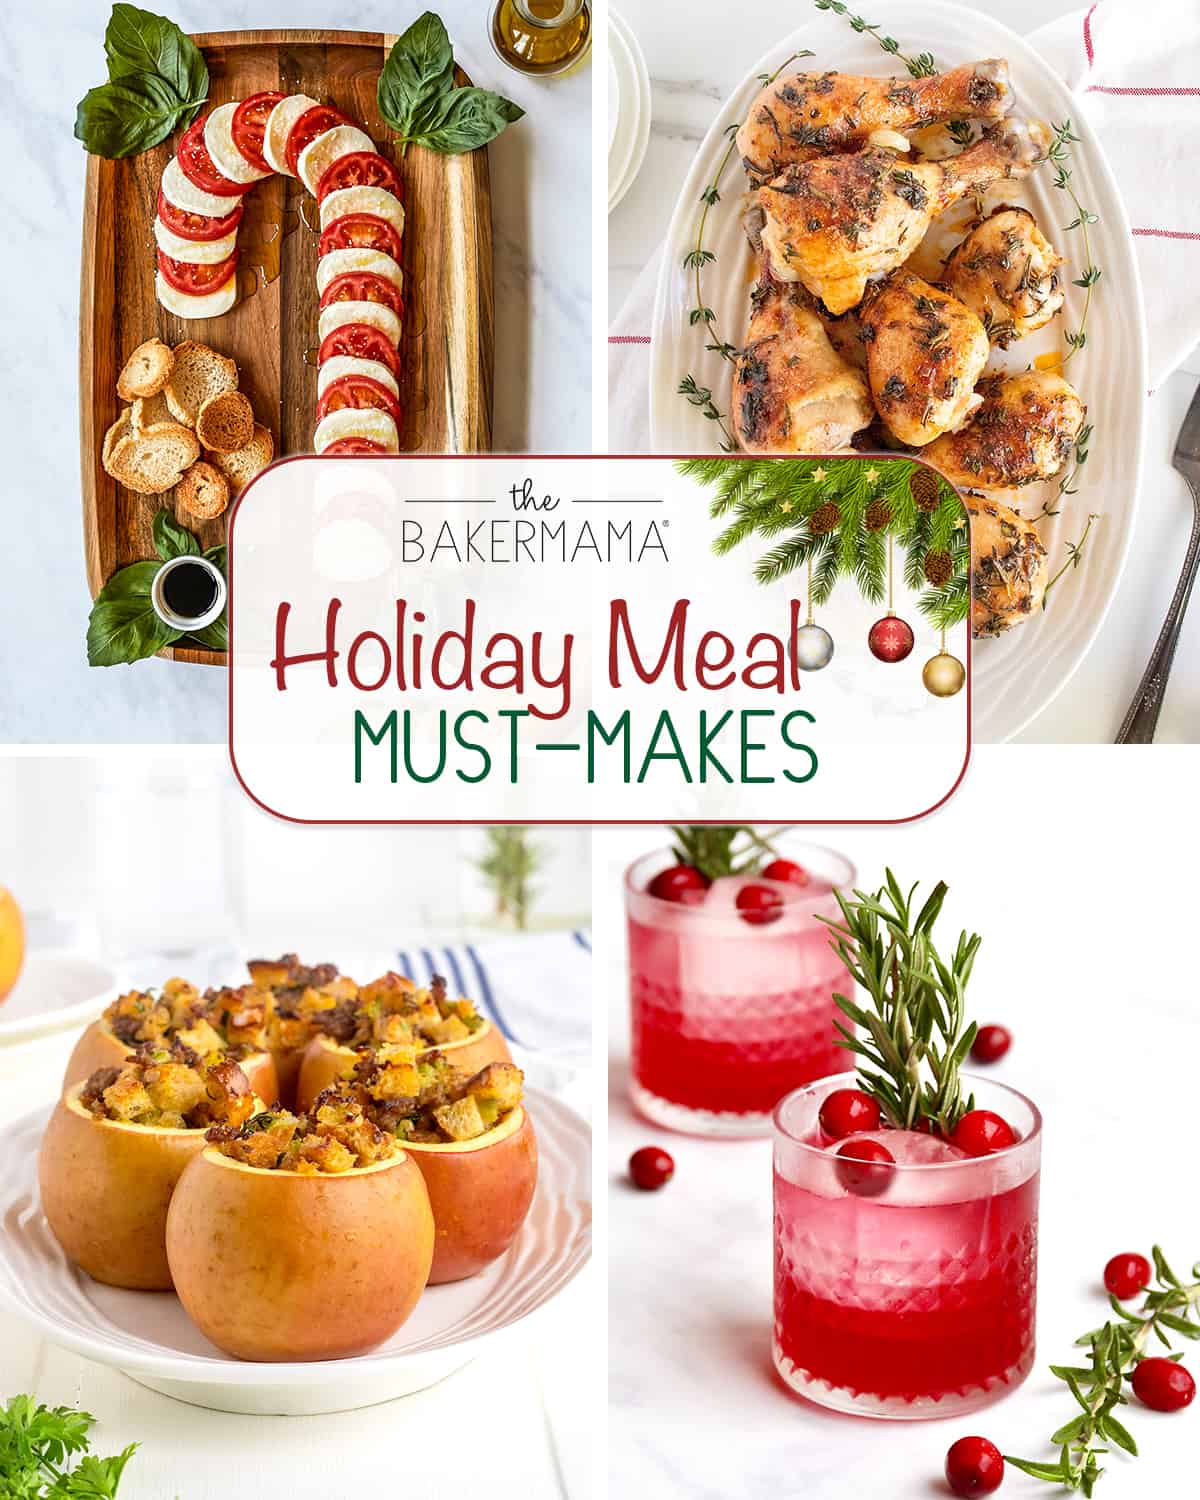 Holiday Meal Must Makes by The BakerMama